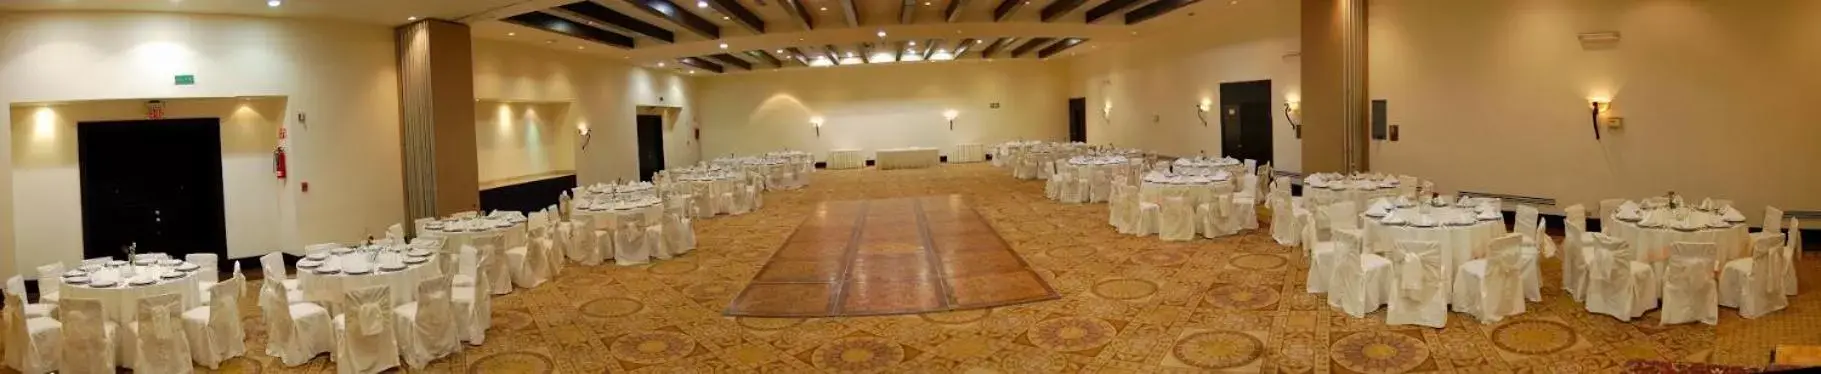 Business facilities, Banquet Facilities in Quality Inn & Suites Saltillo Eurotel